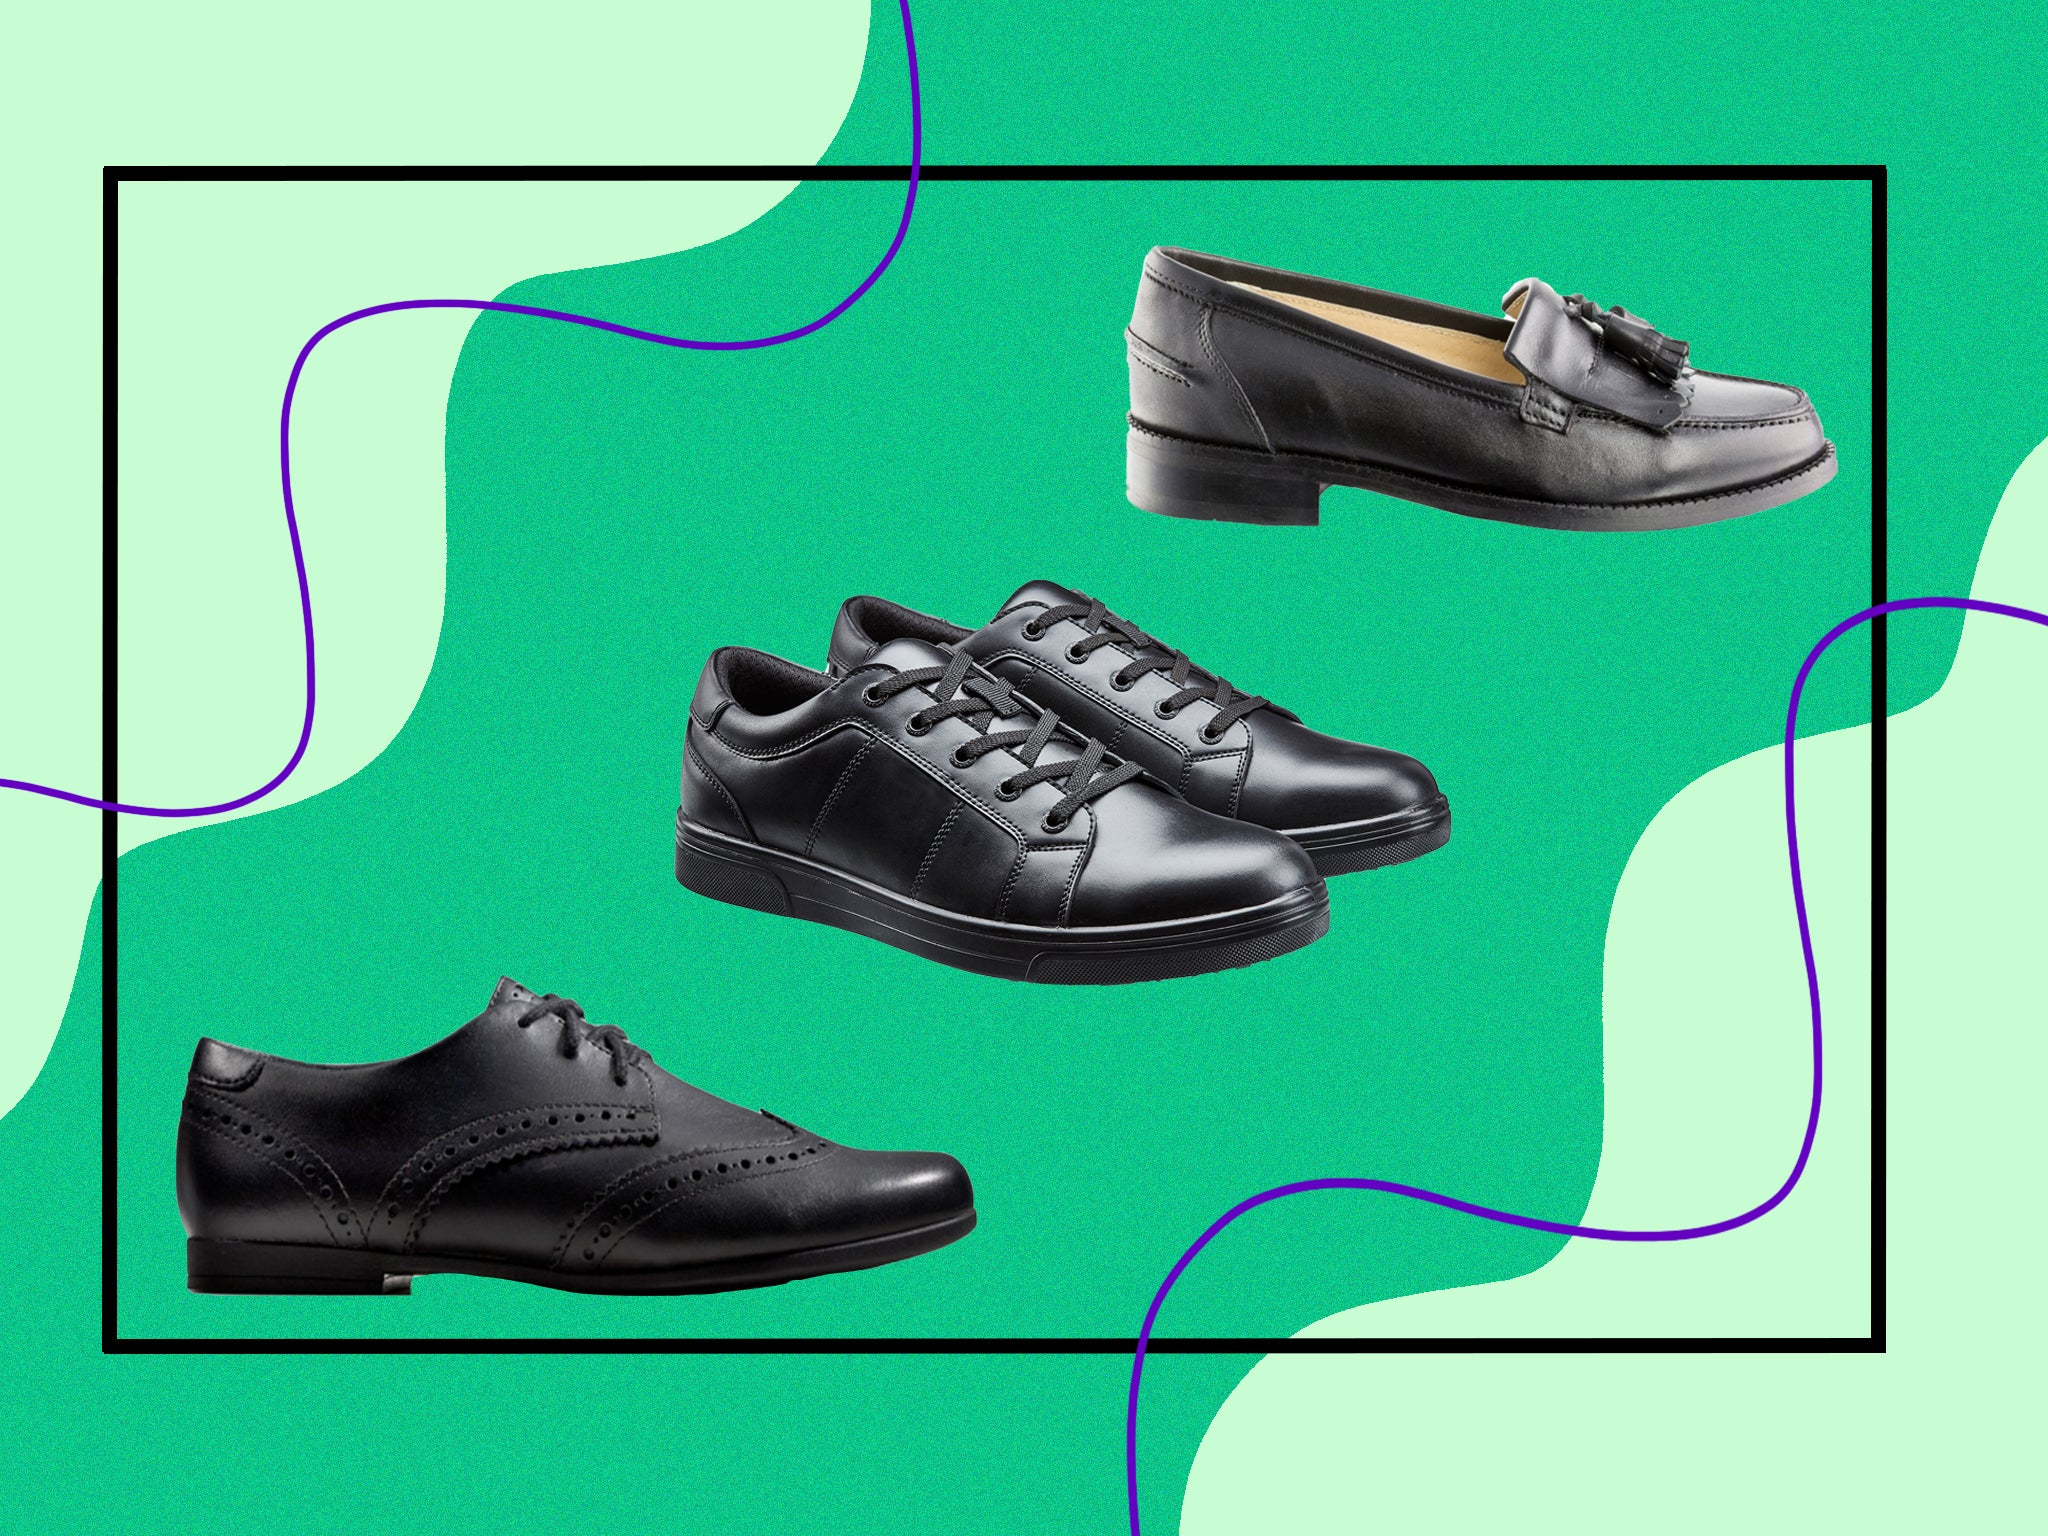 shoe brands that start with t